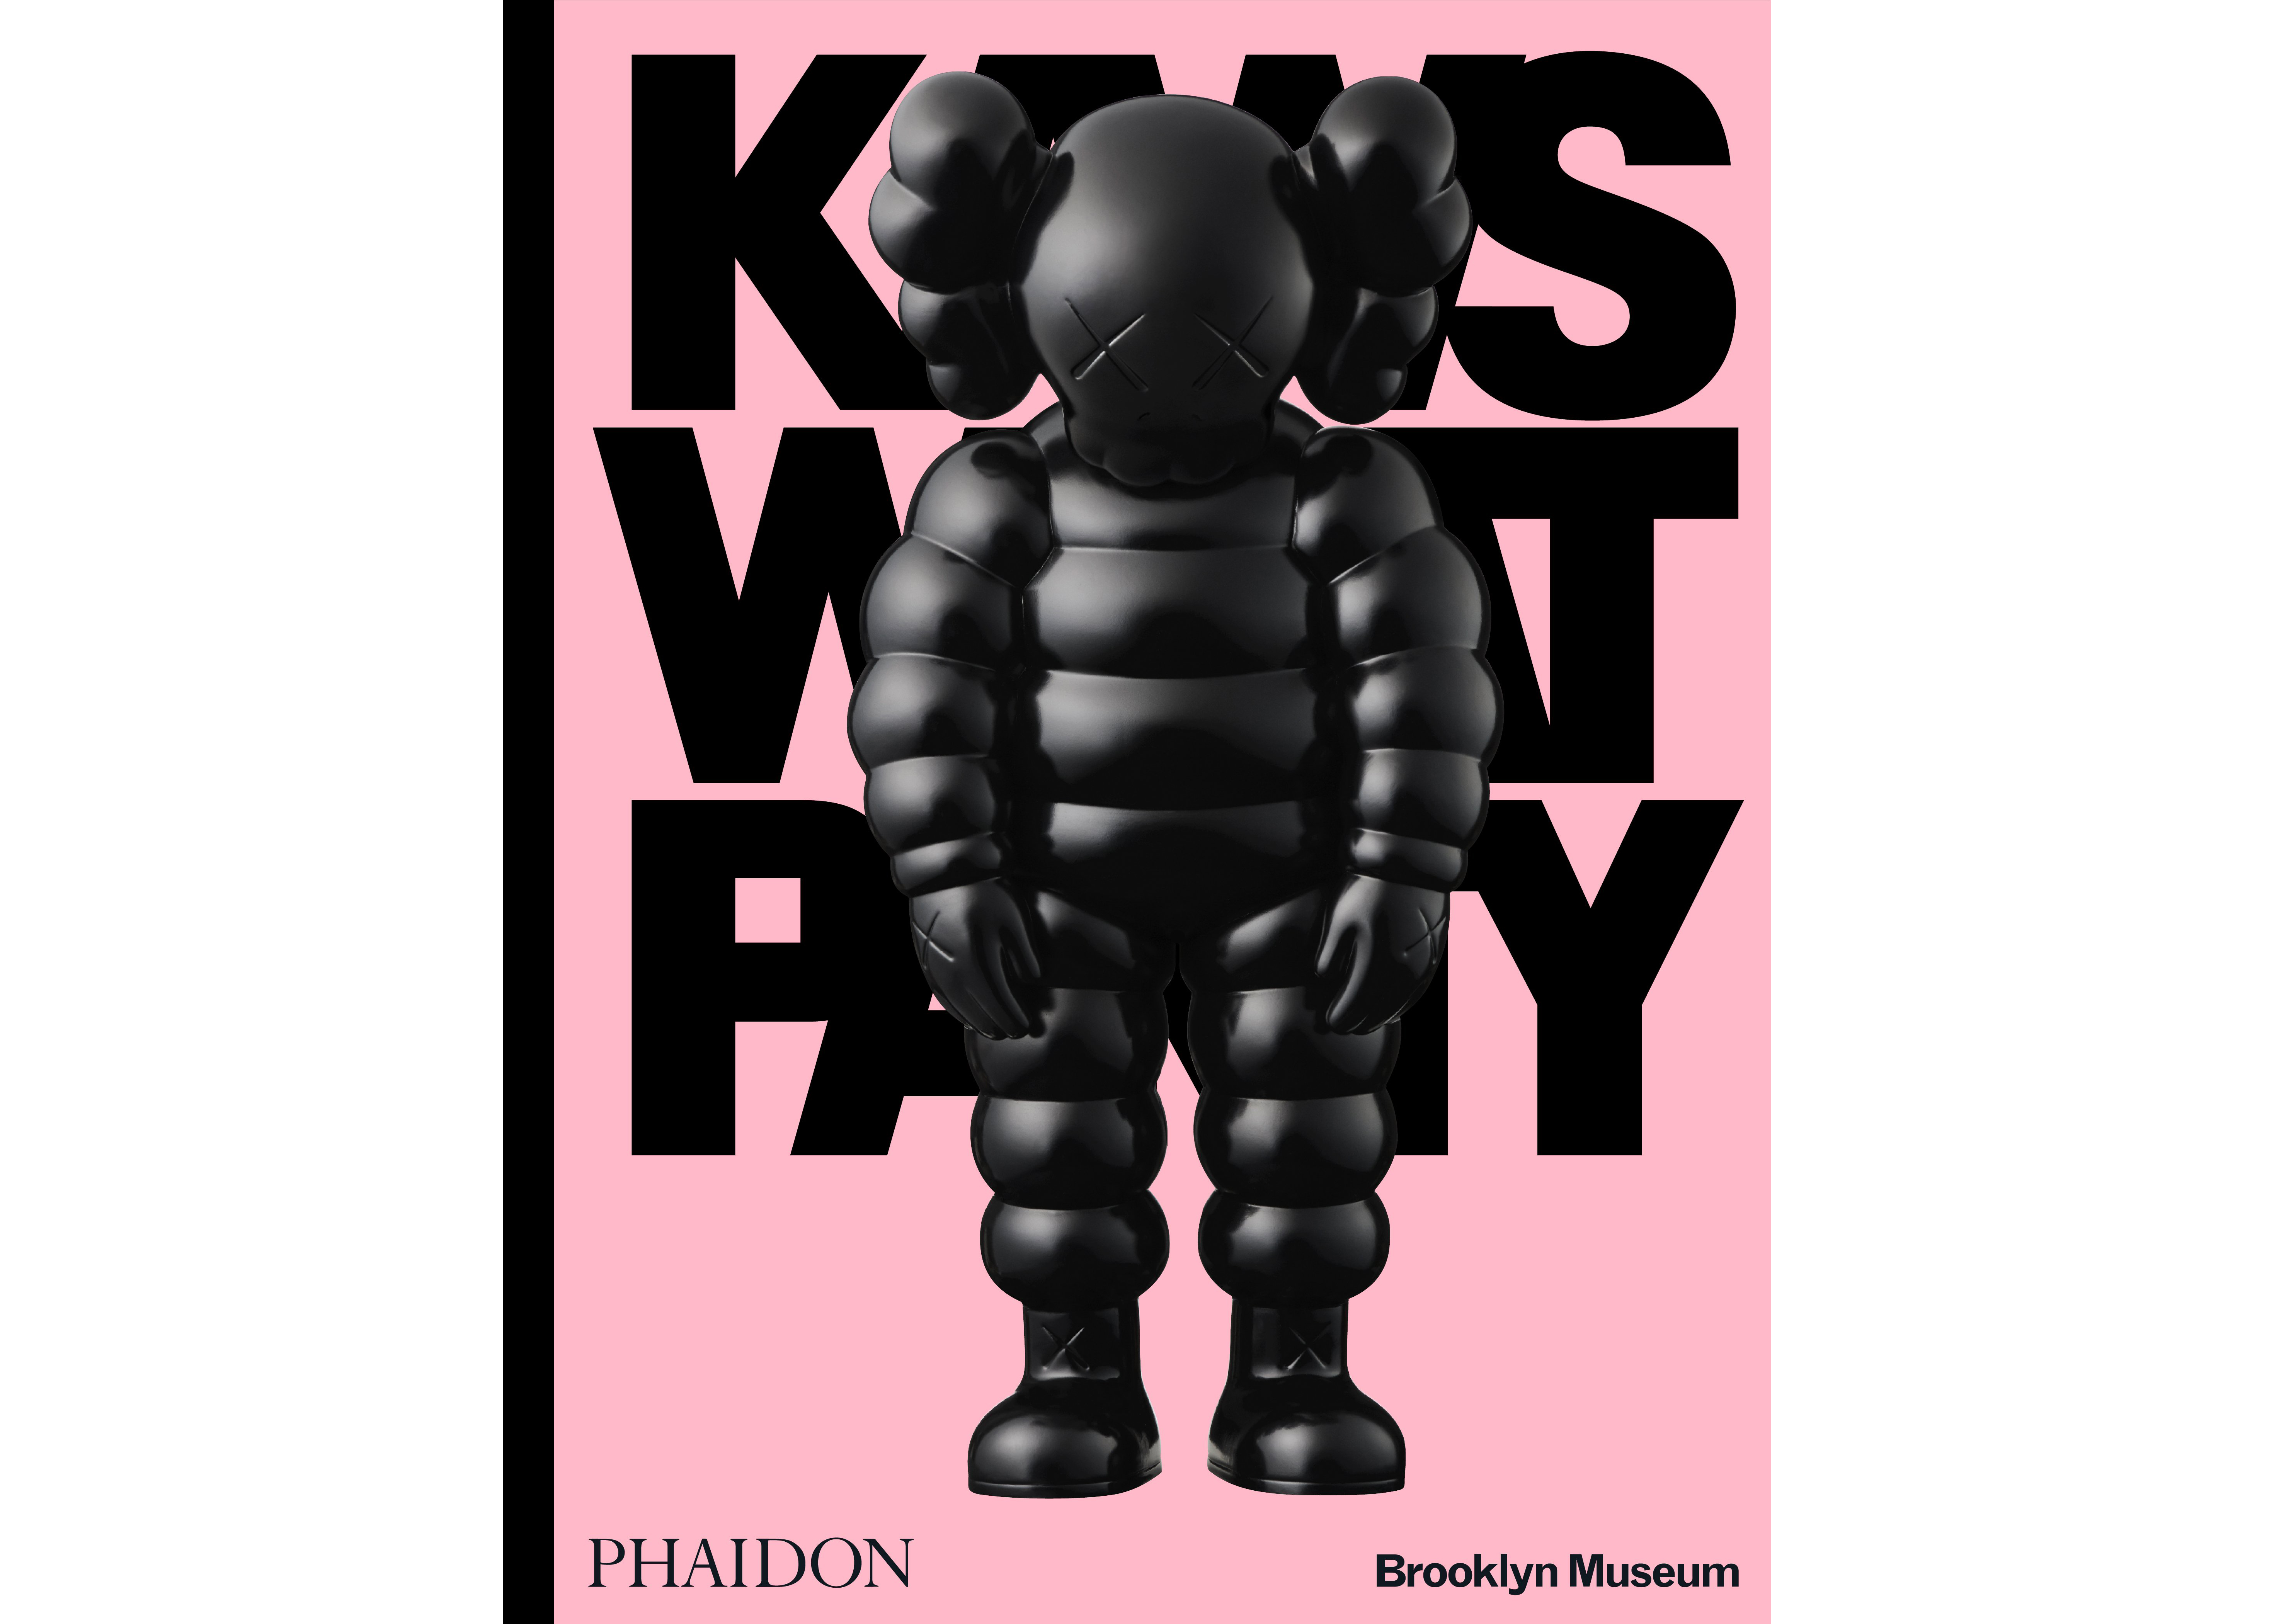 PINK KAWS WHAT PARTY